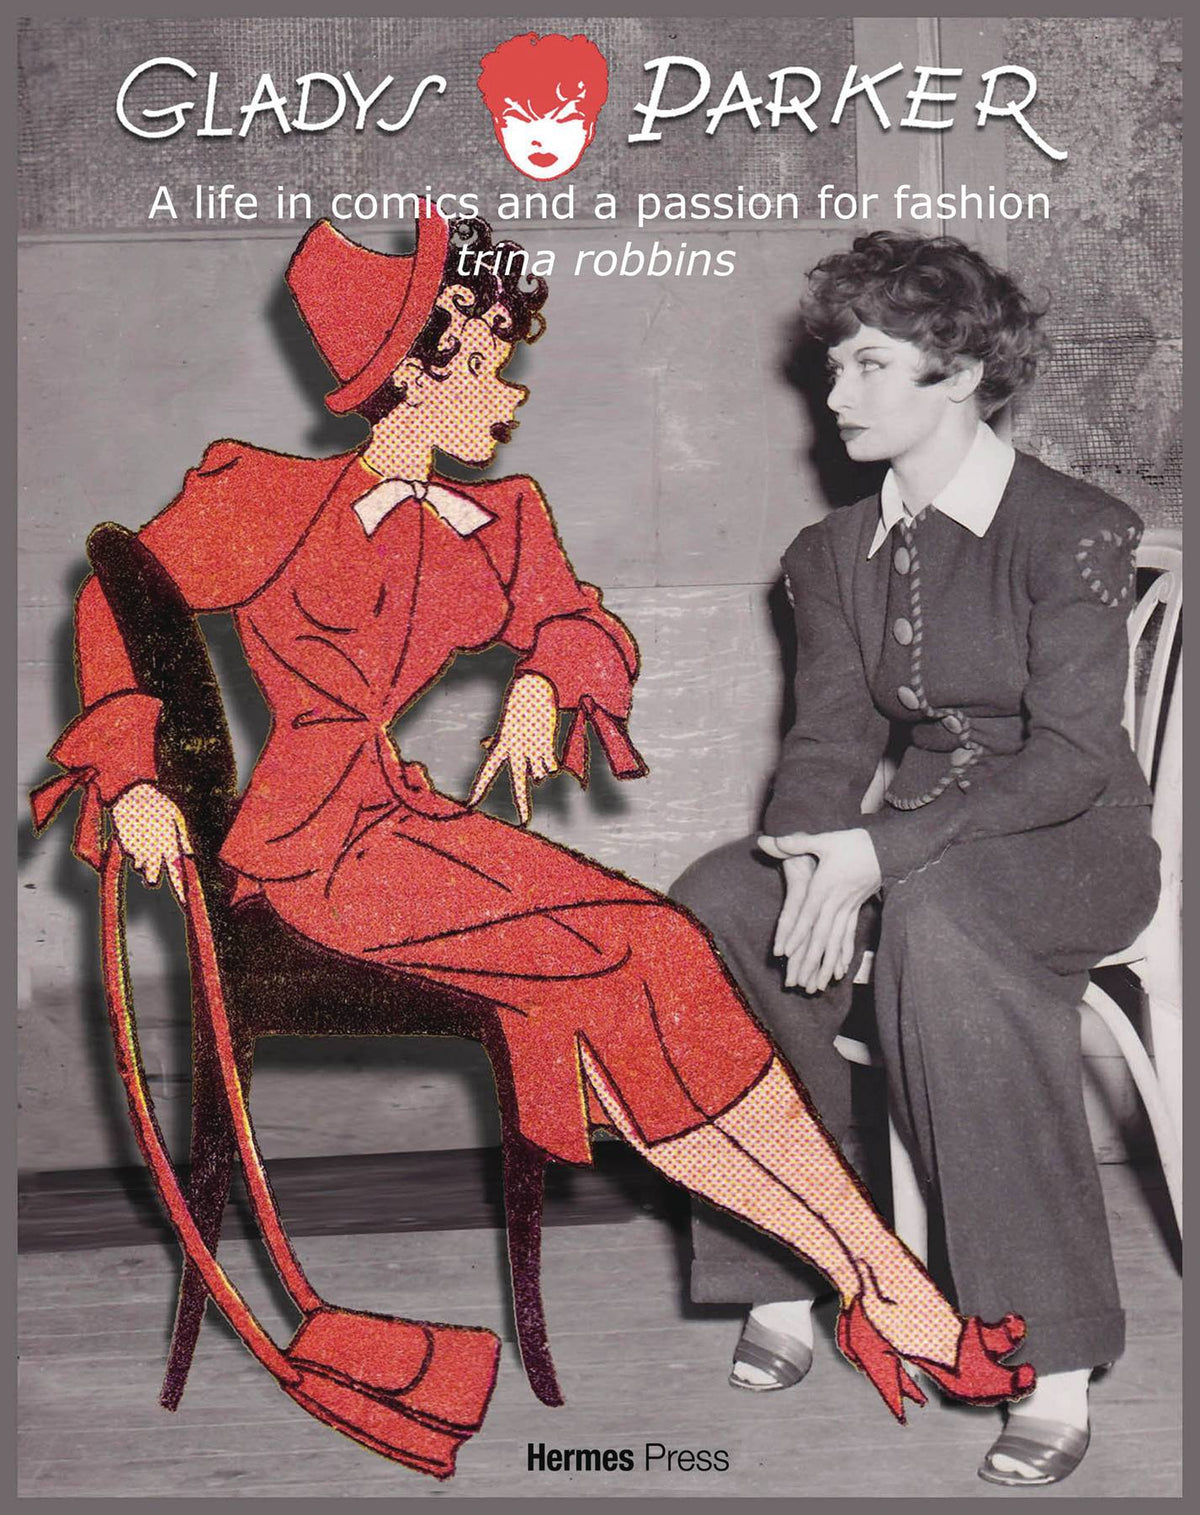 GLADYS PARKER LIFE IN COMICS PASSION FOR FASHION HC - Third Eye